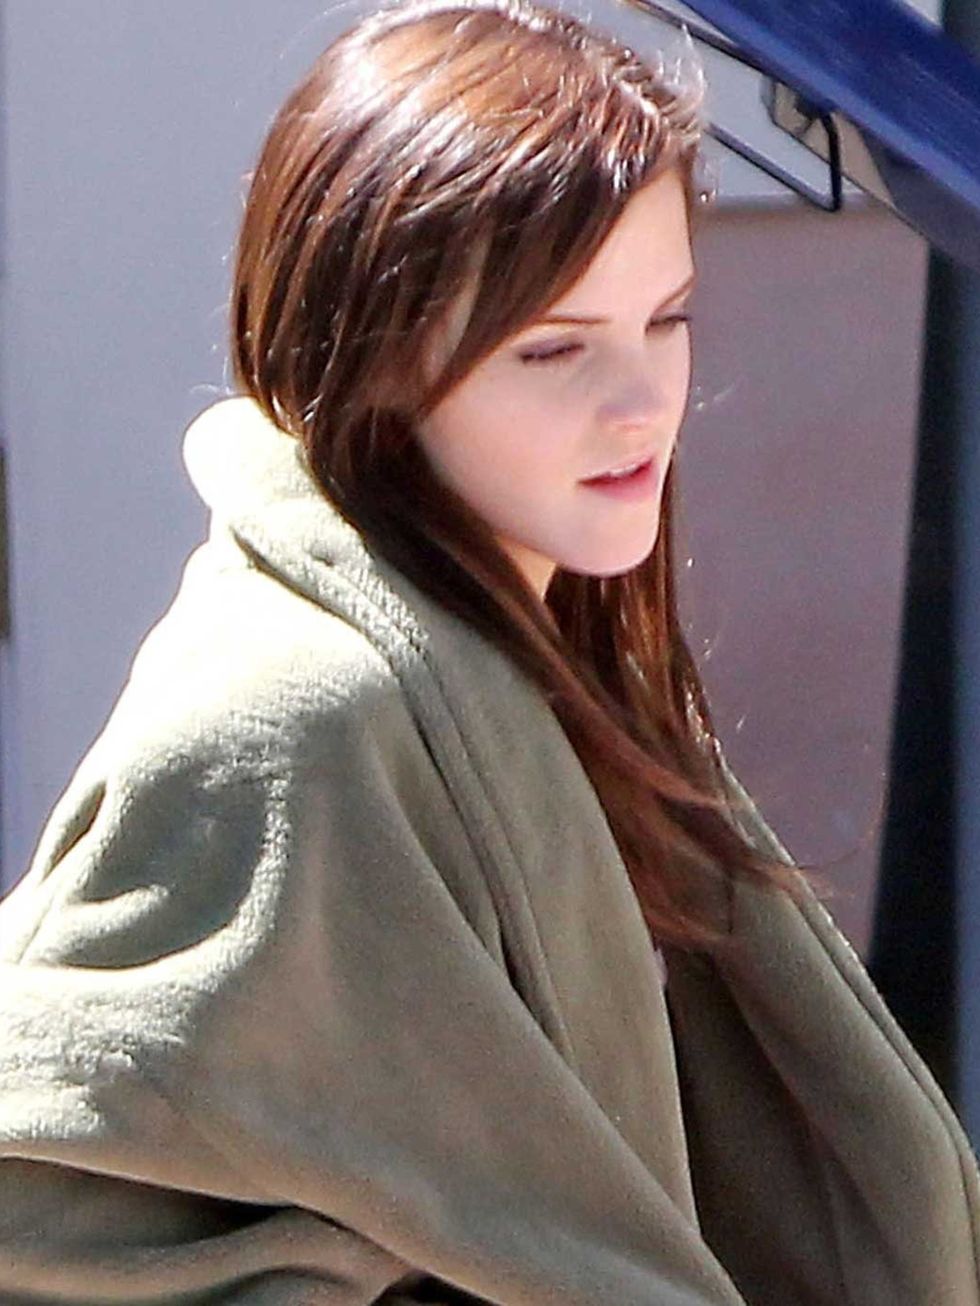 <p>Emma Watson wearing hair extensions on the set of her new film, The Bling Ring</p>